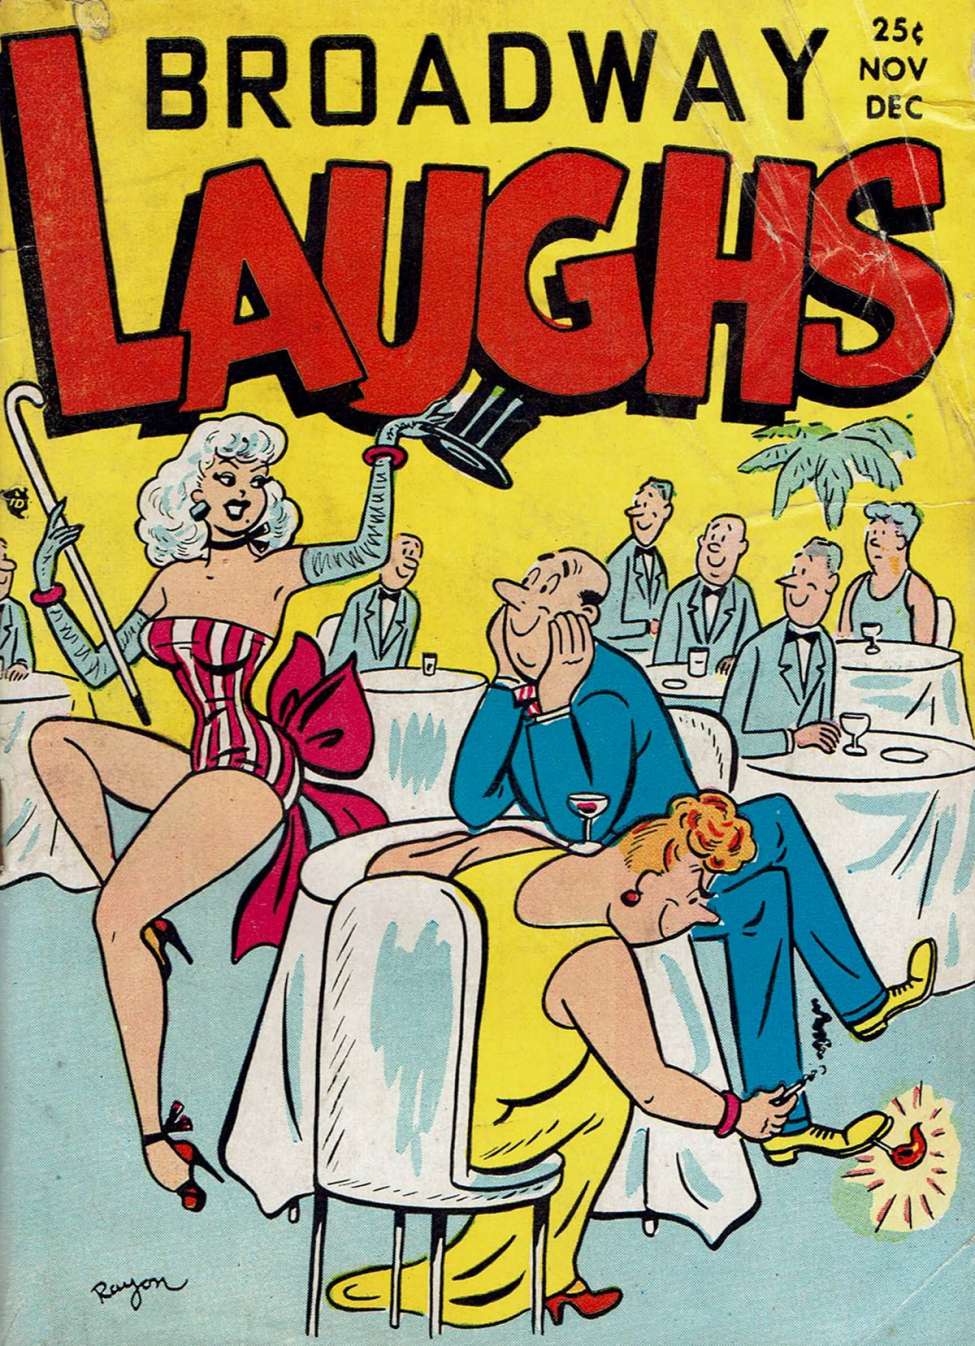 Book Cover For Broadway Laughs v11 4